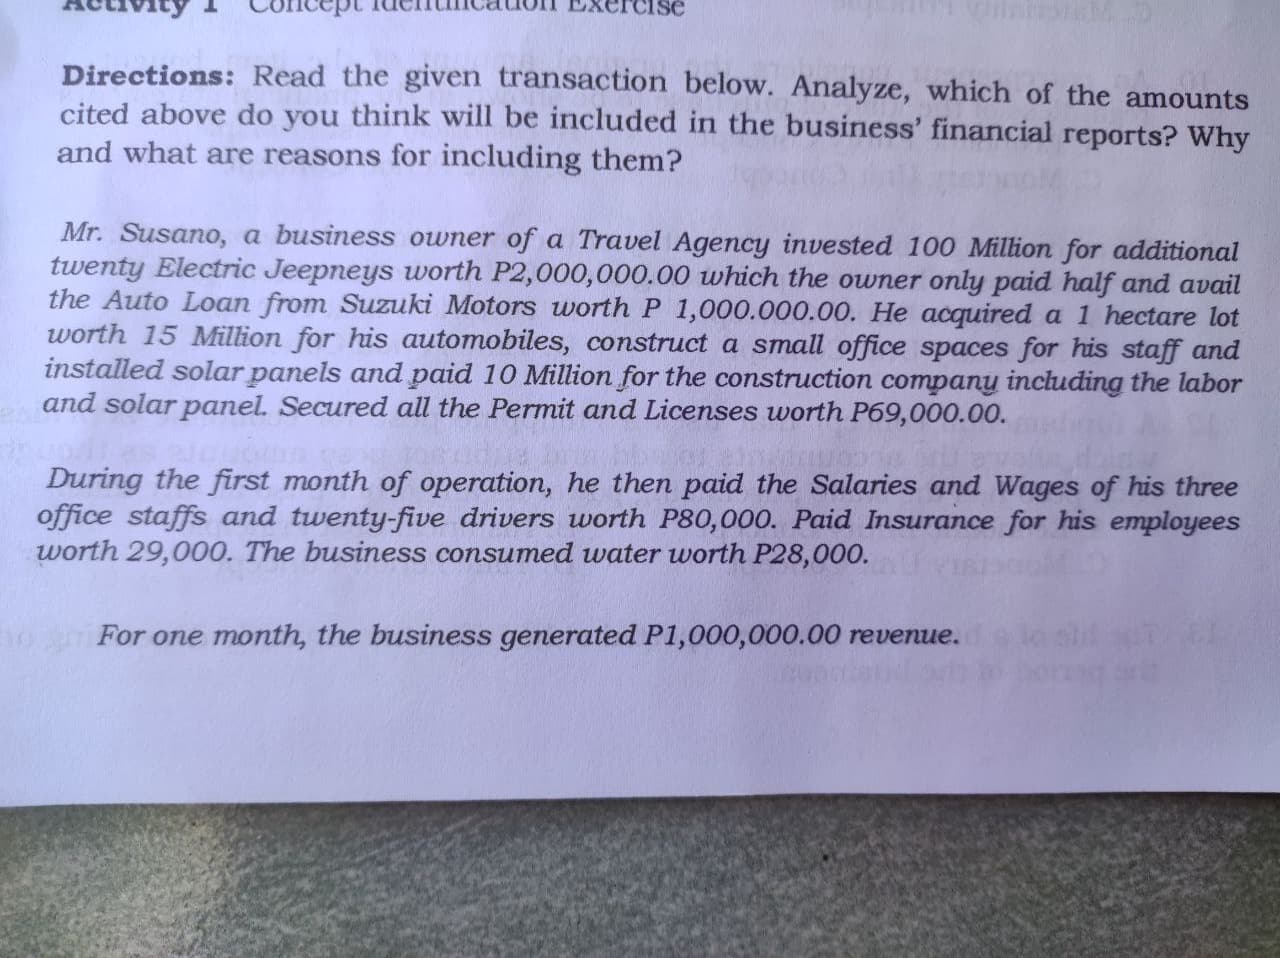 Directions: Read the given transaction below. Analyze, which of the amounts
cited above do you think will be included in the business' financial reports? Why
and what are reasons for including them?
Mr. Susano, a business owner of a Travel Agency invested 100 Million for additional
twenty Electric Jeepneys worth P2,000,000.00 which the owner only paid half and avail
the Auto Loan from Suzuki Motors worth P 1,000.000.00. He acquired a 1 hectare lot
worth 15 Million for his automobiles, construct a small office spaces for his staff and
installed solar panels and paid 10 Million for the construction company including the labor
and solar panel. Secured all the Permit and Licenses worth P69,000.00.
During the first month of operation, he then paid the Salaries and Wages of his three
office staffs and twenty-five drivers worth P80,000. Paid Insurance for his employees
worth 29,000. The business consumed water worth P28,000.
For one month, the business generated P1,000,000.00 revenue. lolil
